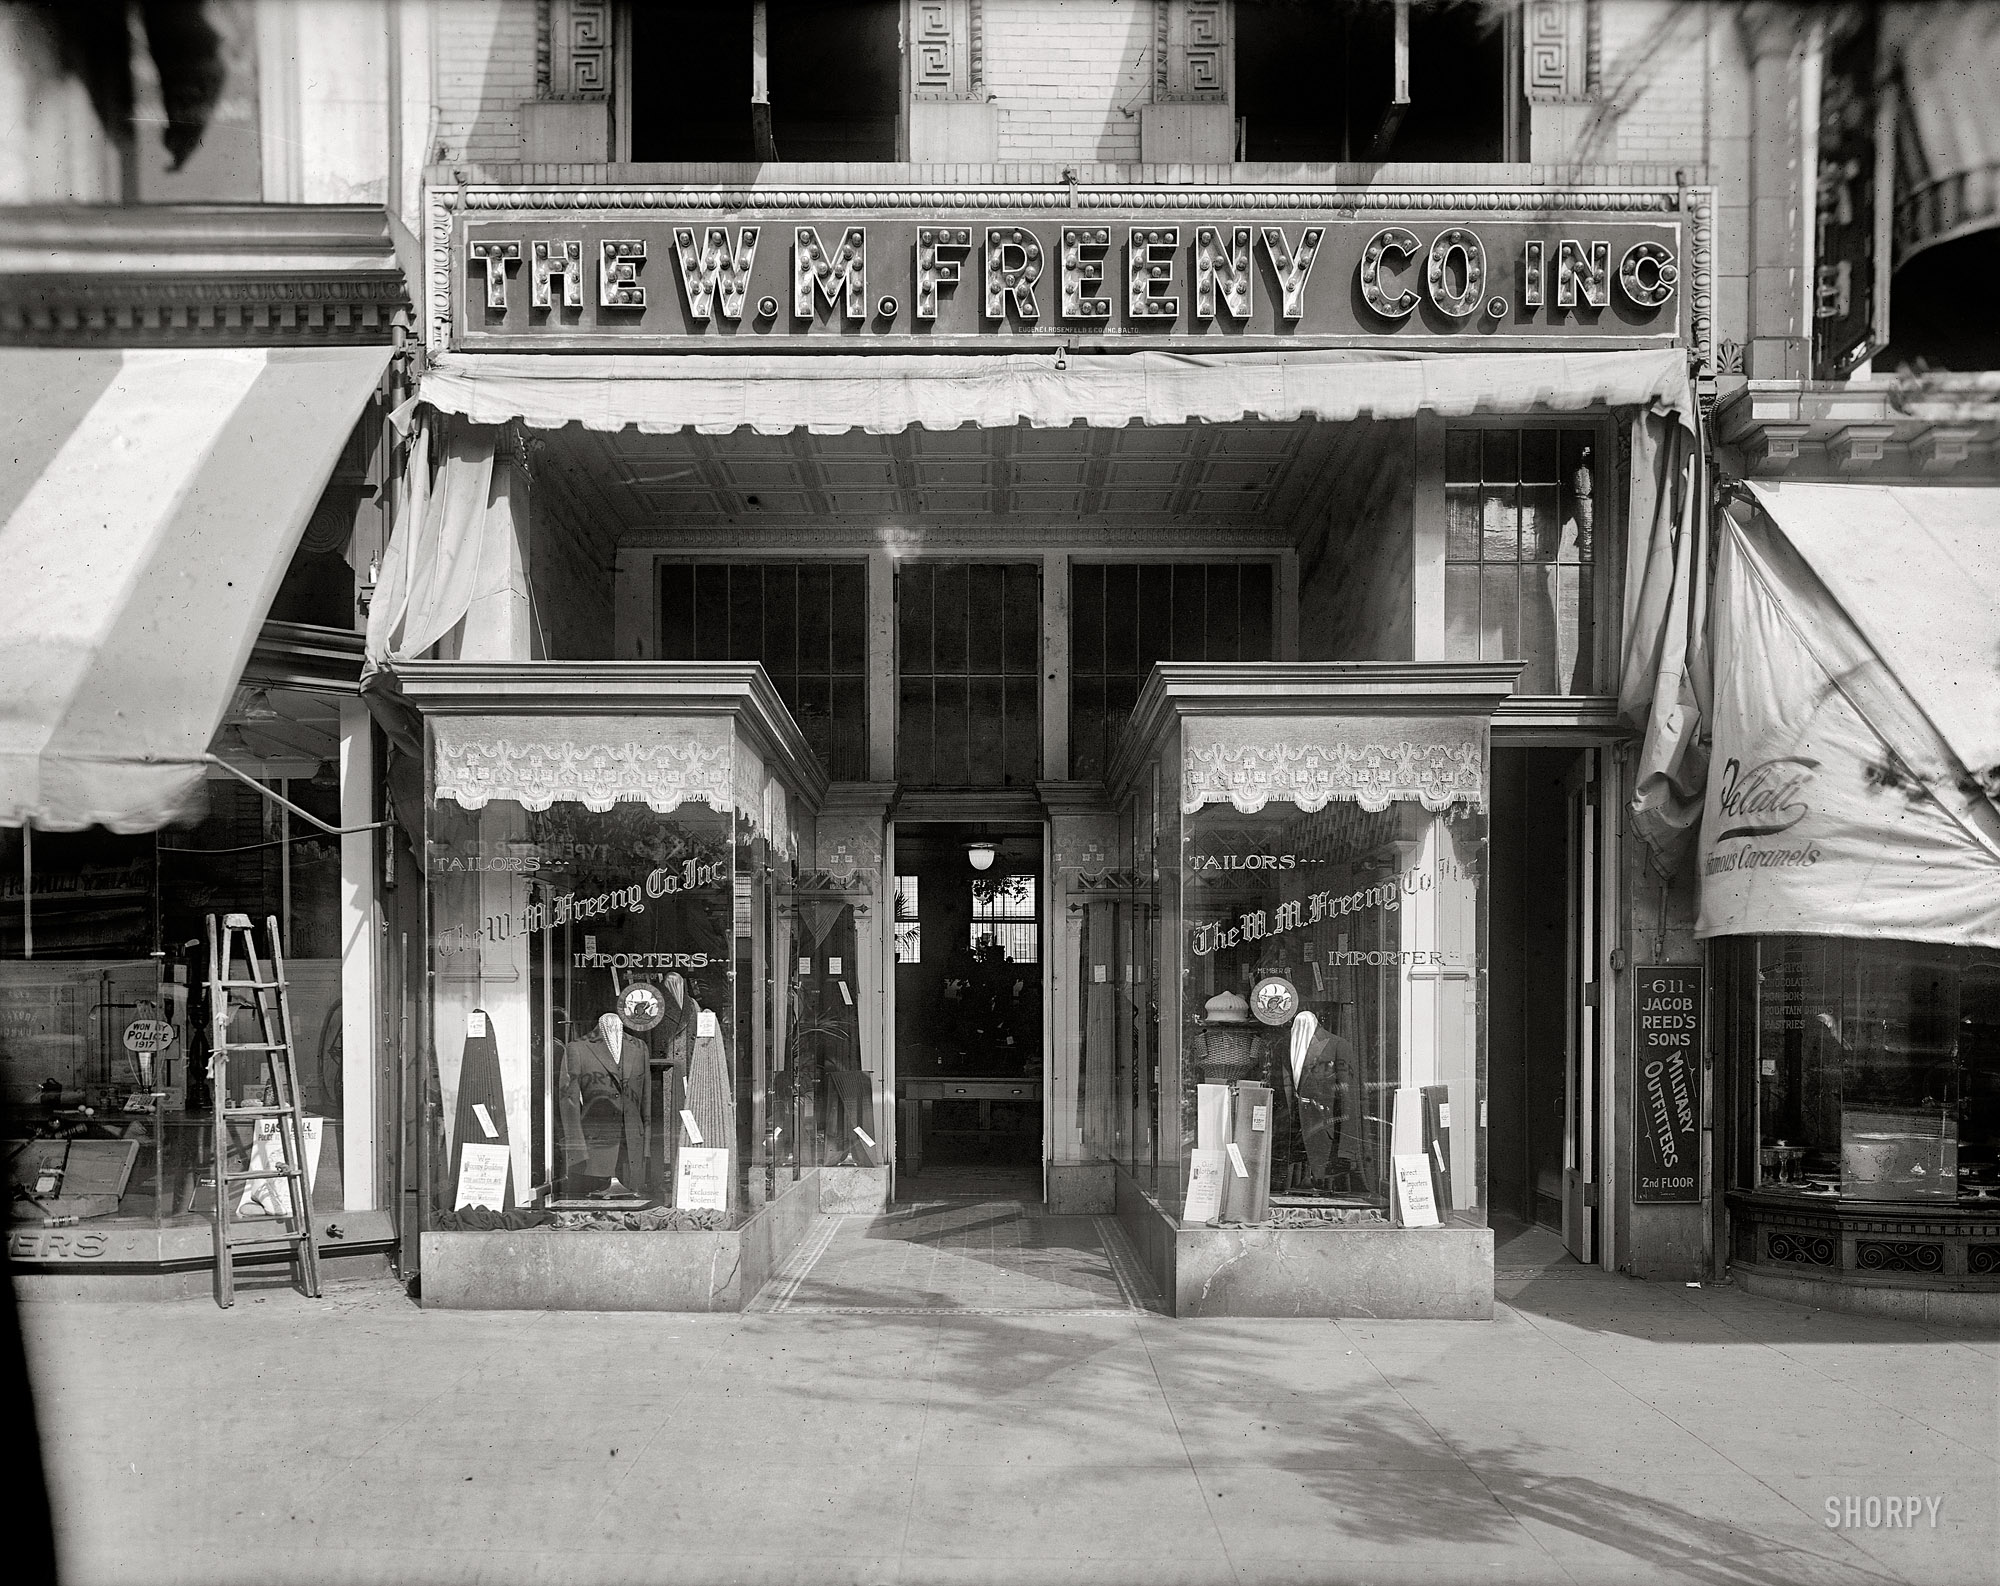 Washington, D.C., circa 1920. "W.M. Freeny Co., front." The W.M. Freeny men's clothing store on 14th Street. National Photo Co. glass negative. View full size.